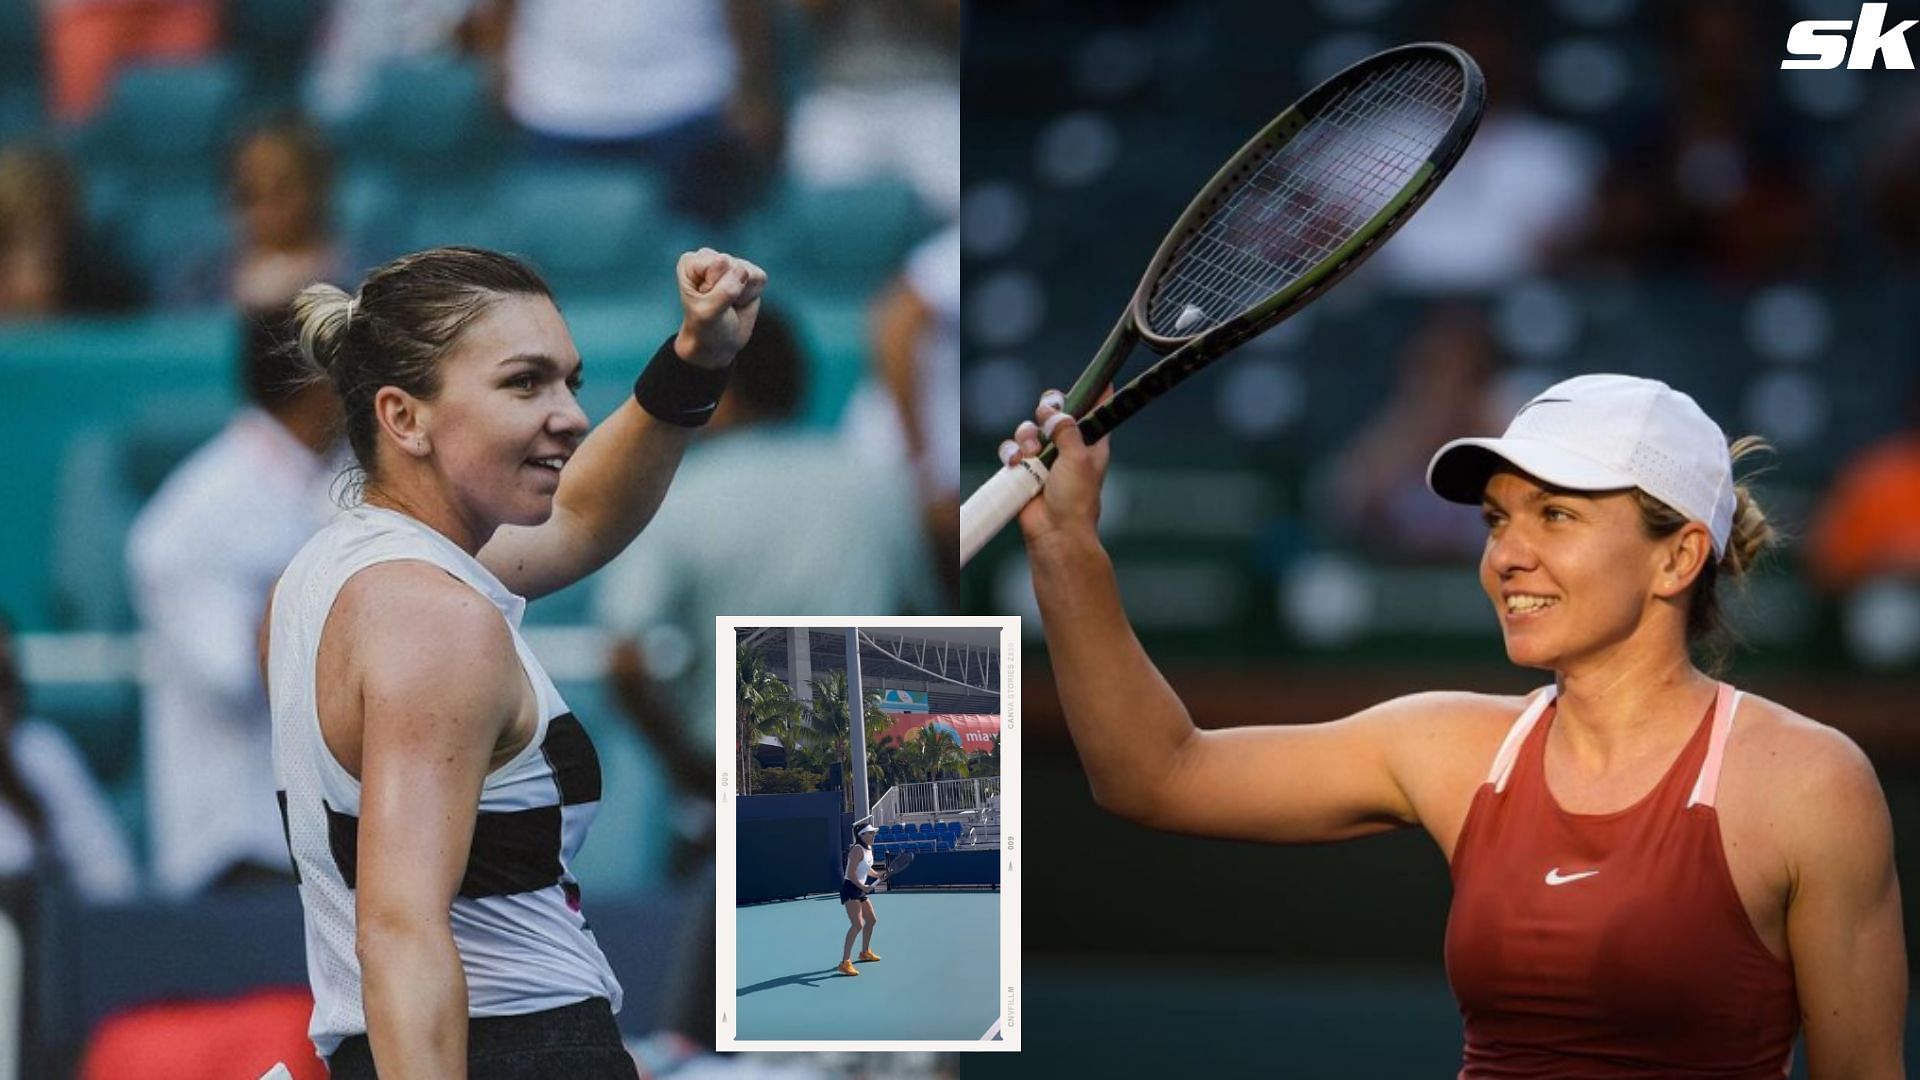 Simona Halep will return to action at the Miami Open after her successful CAS appeal